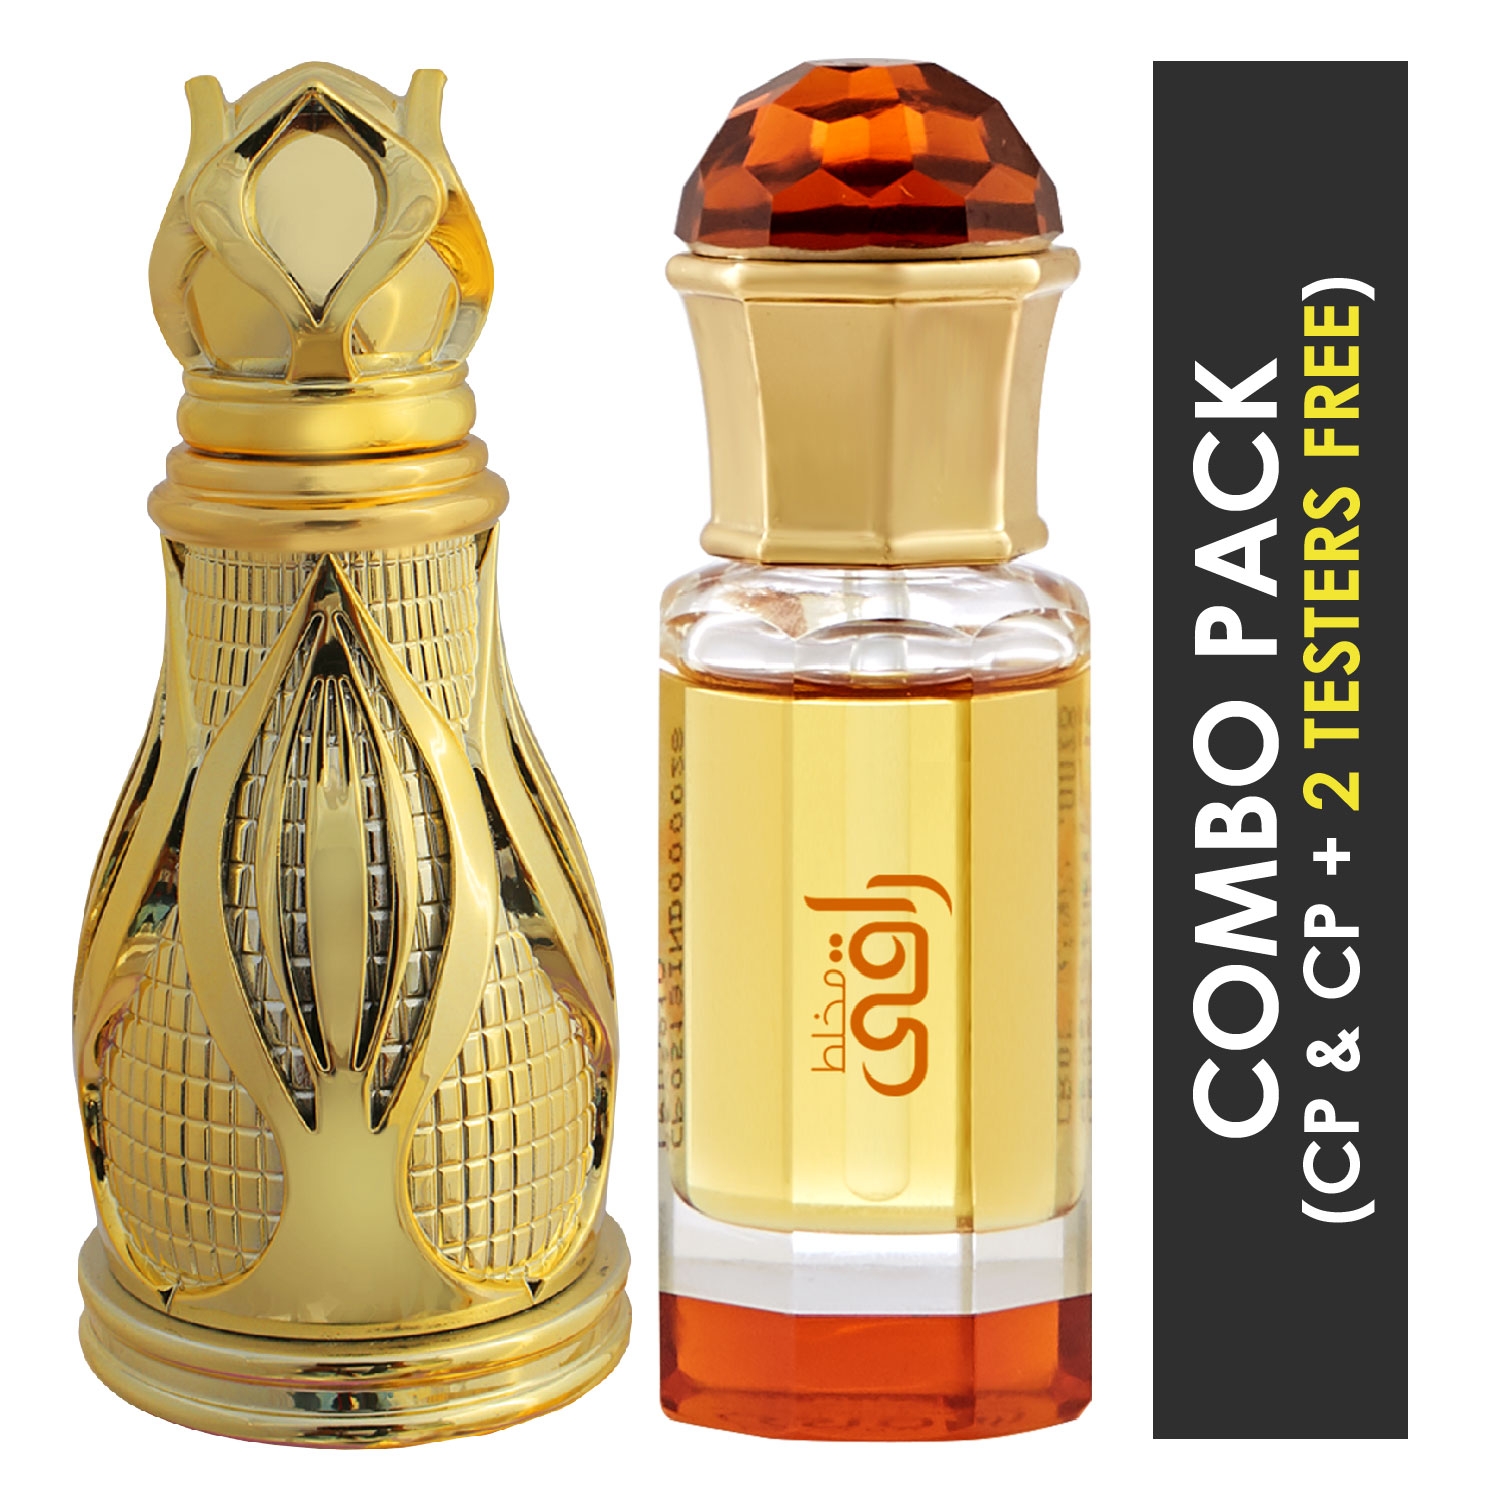 Ajmal | Ajmal Khofooq Concentrated Perfume Attar 18ml for Unisex and Mukhallat Raaqi Concentrated Perfume Attar 10ml for Unisex + 2 Parfum Testers FREE